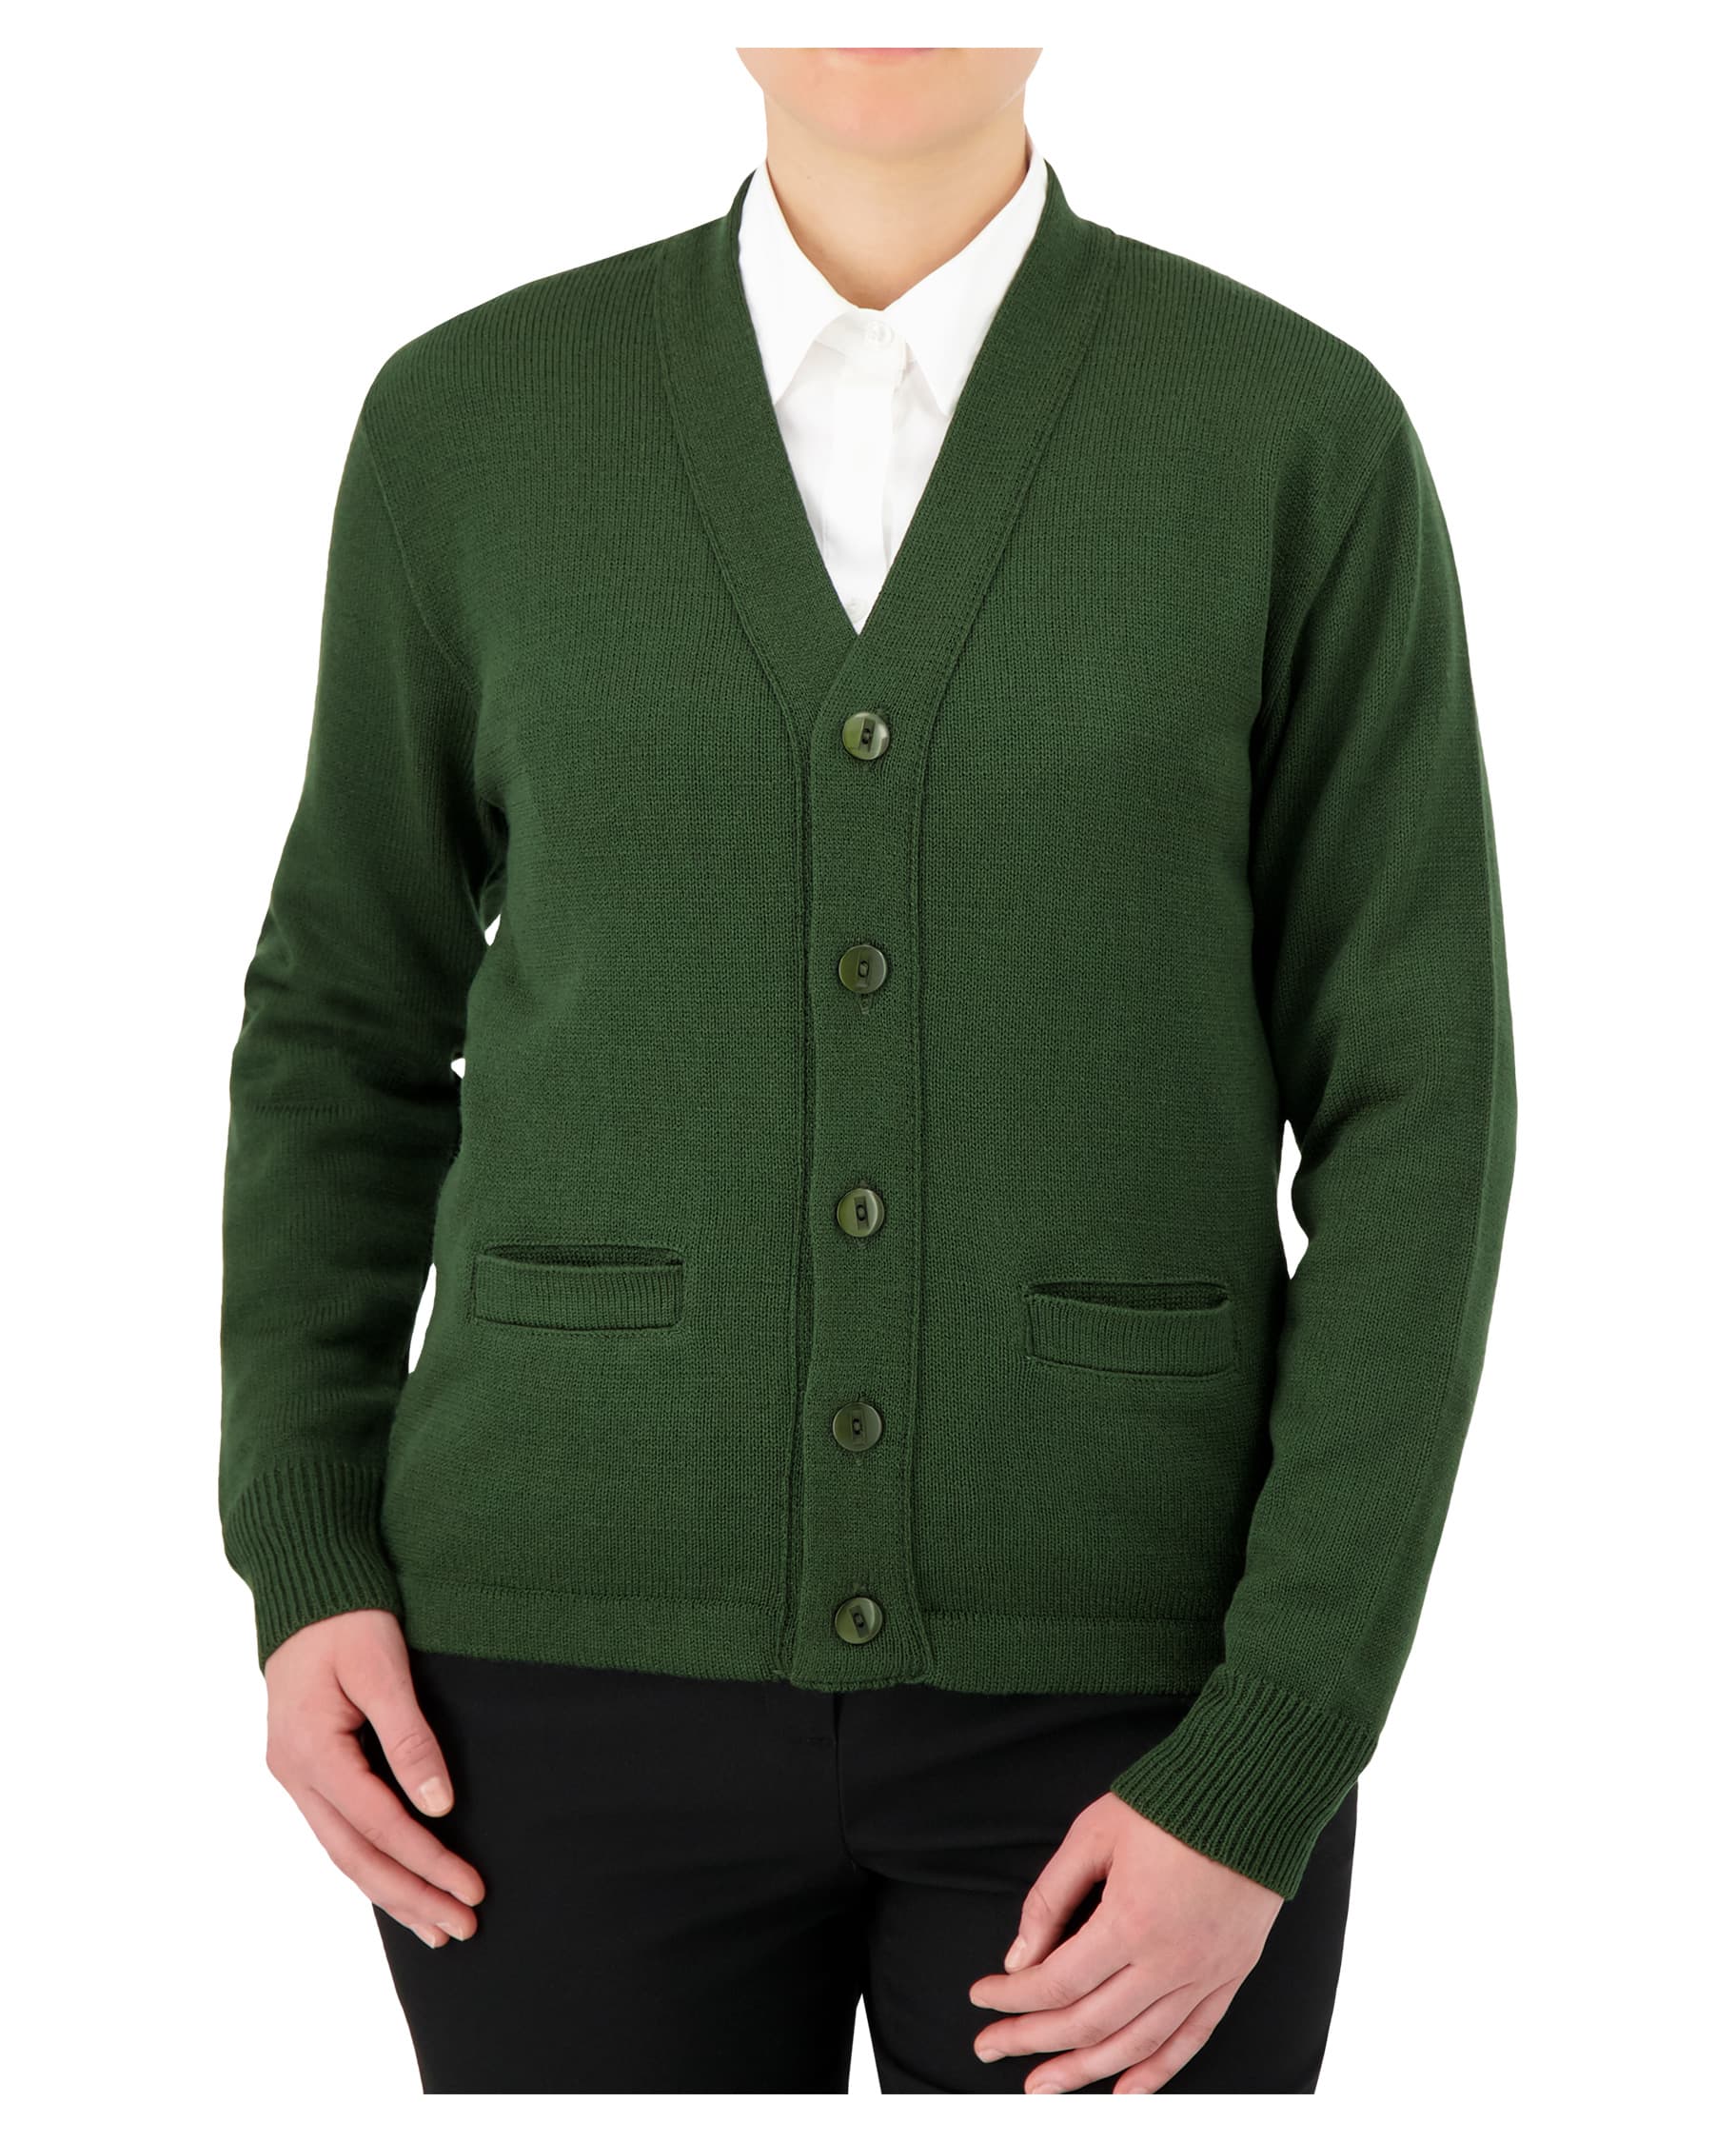 green v-neck button down cardigan with buttons